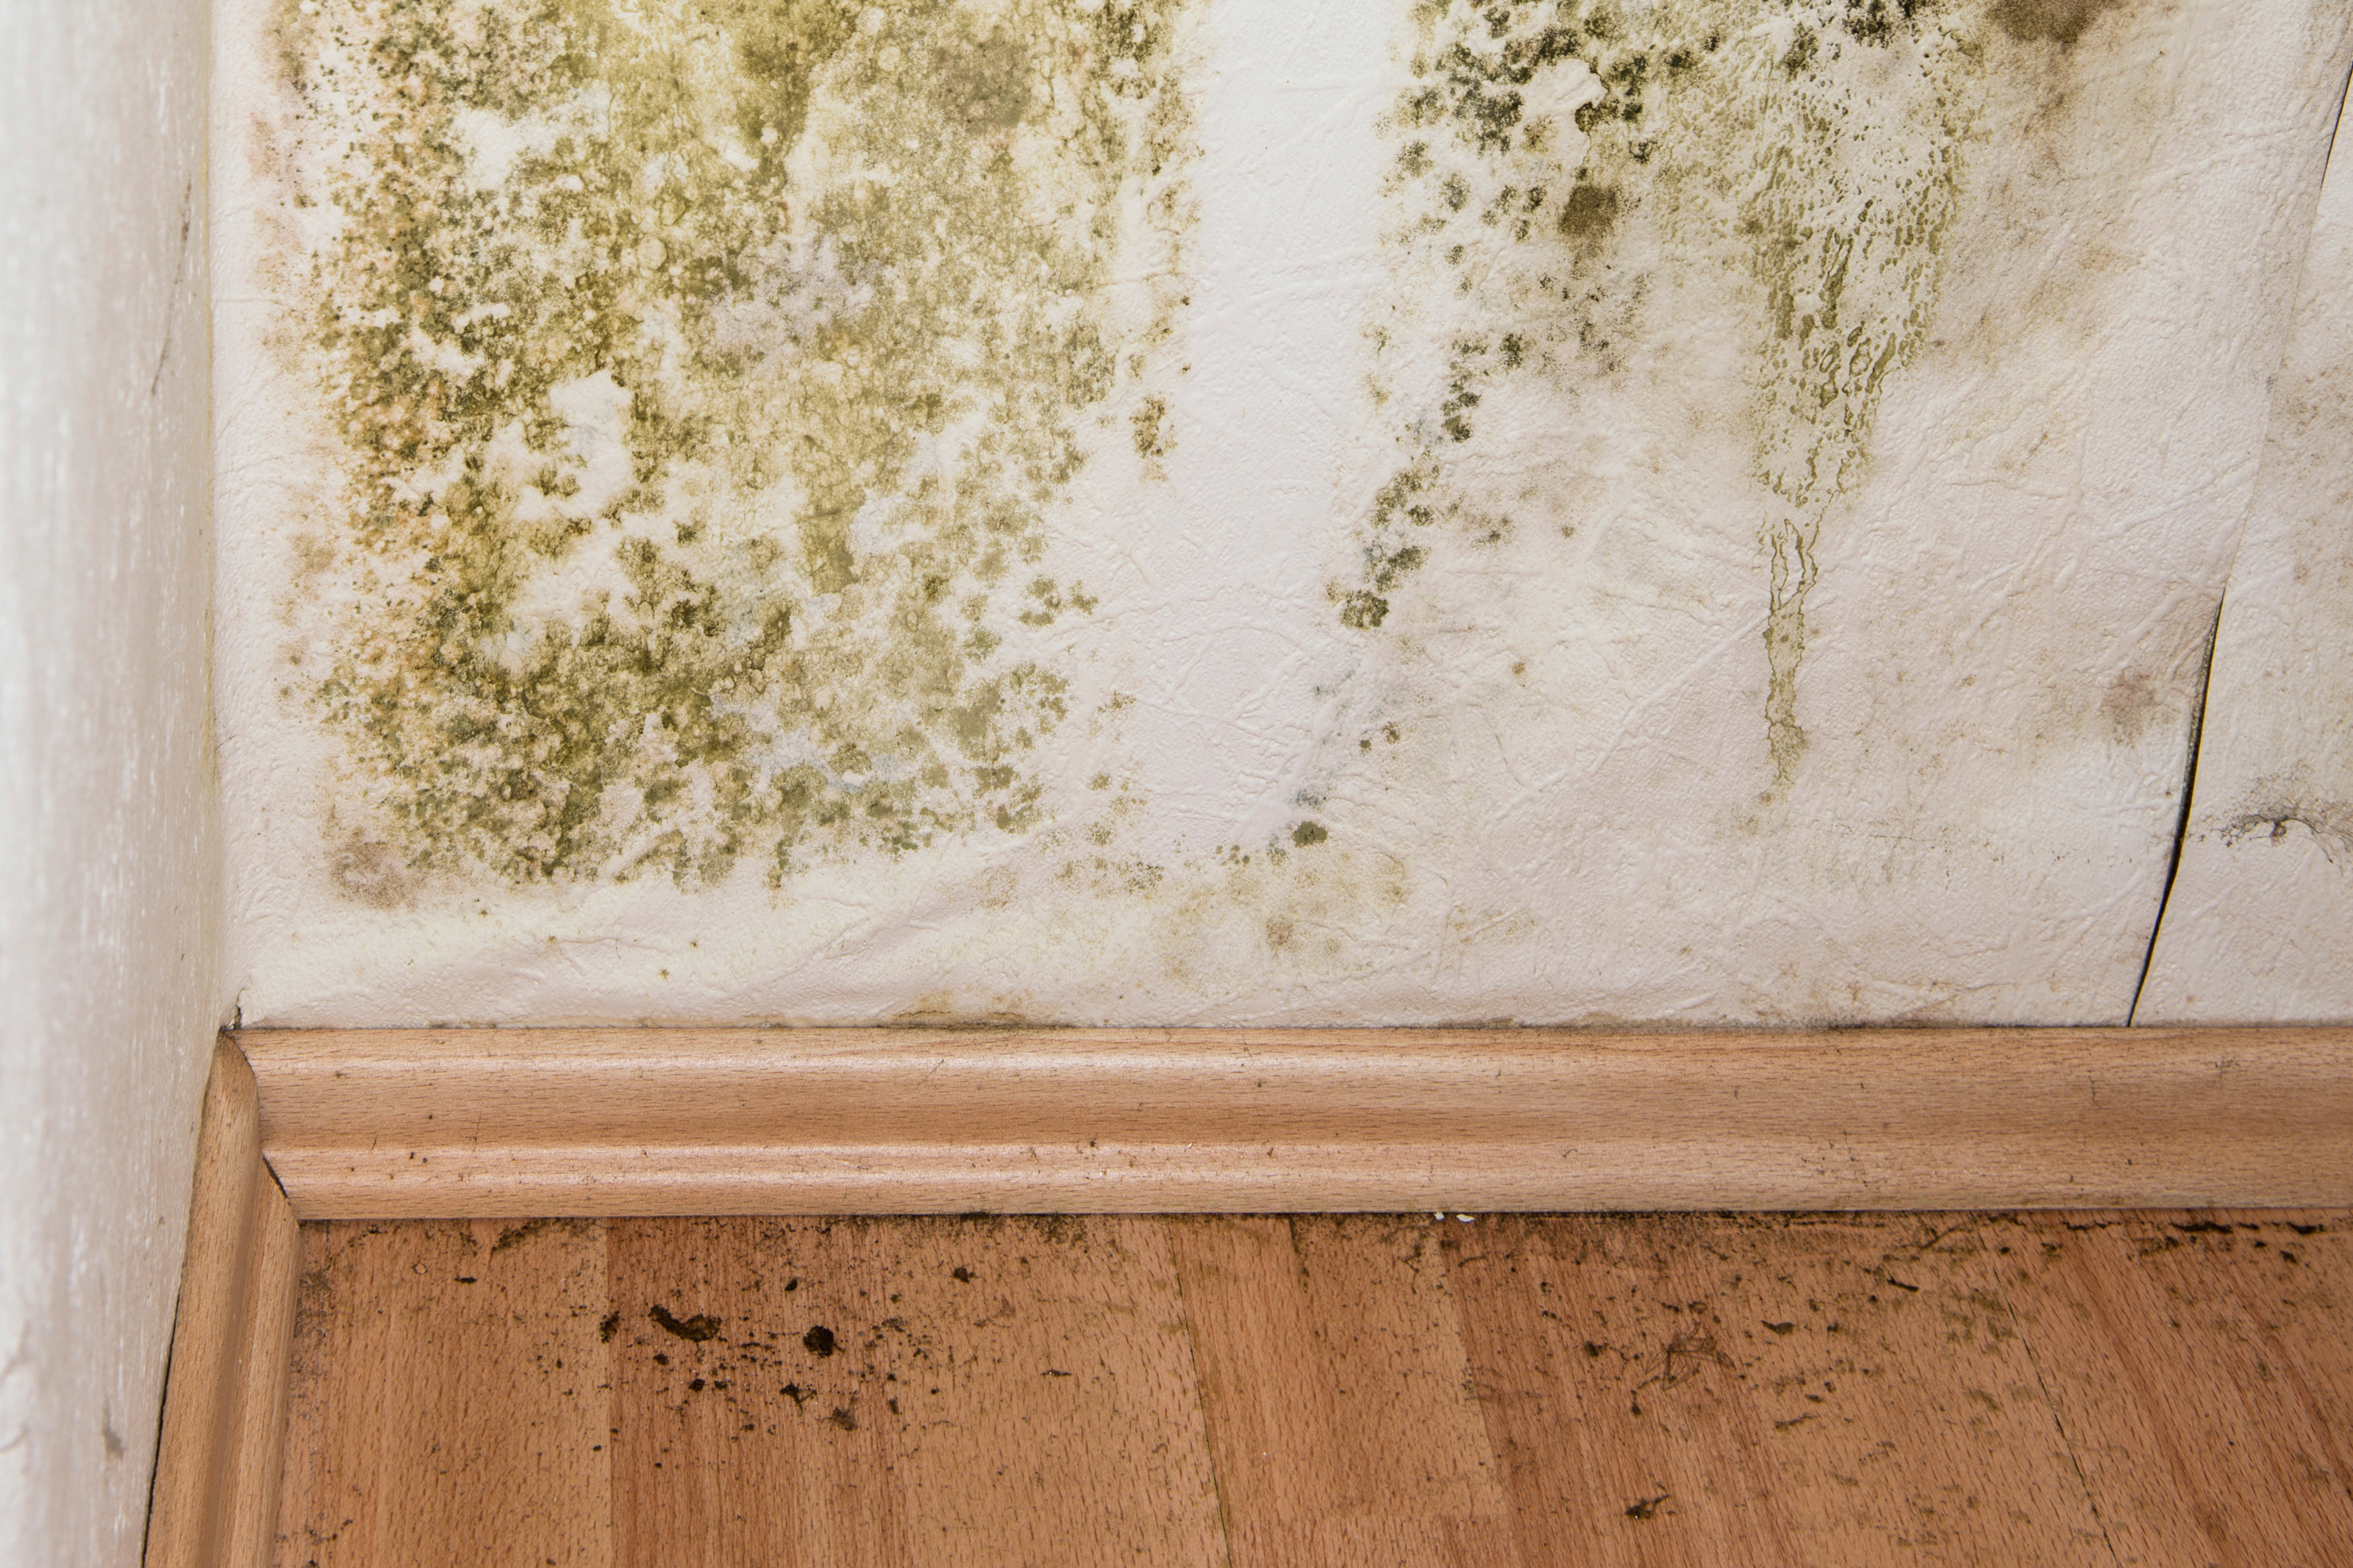 Cost of Mold Inspection: DIY vs Pro